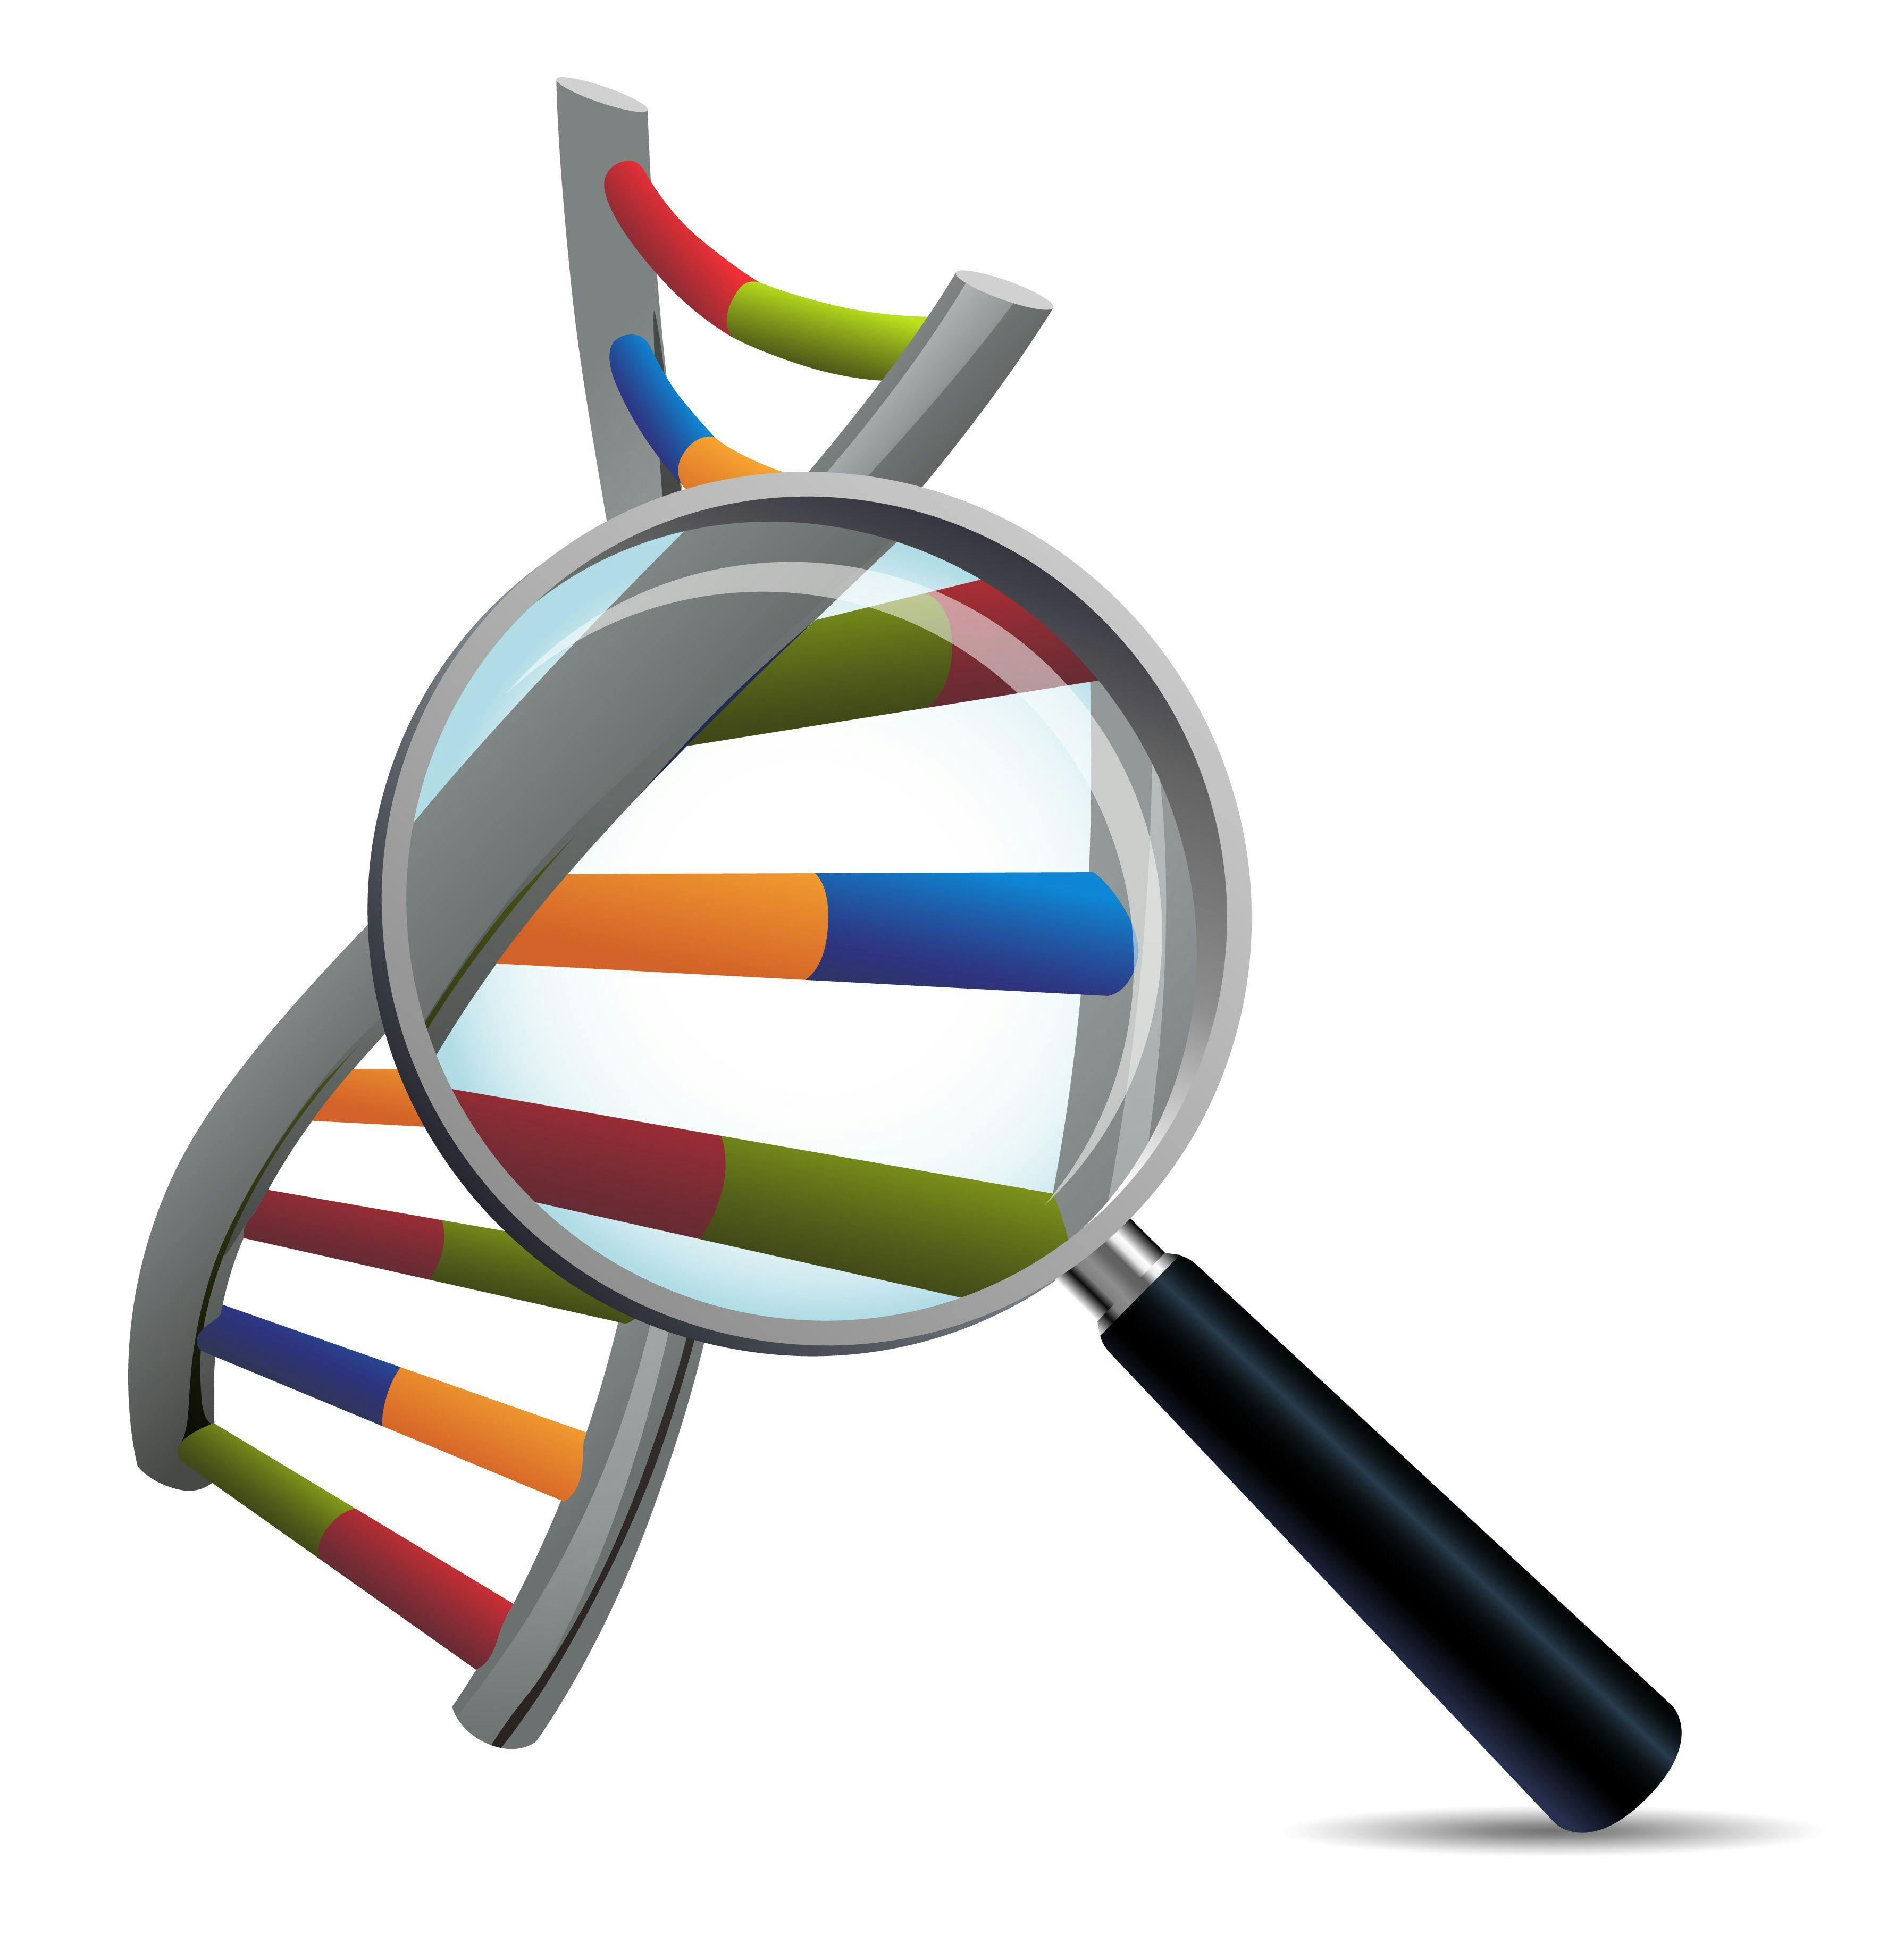 Exome Sequencing Reveals Genetic Origins of Some Kidney Disease Cases